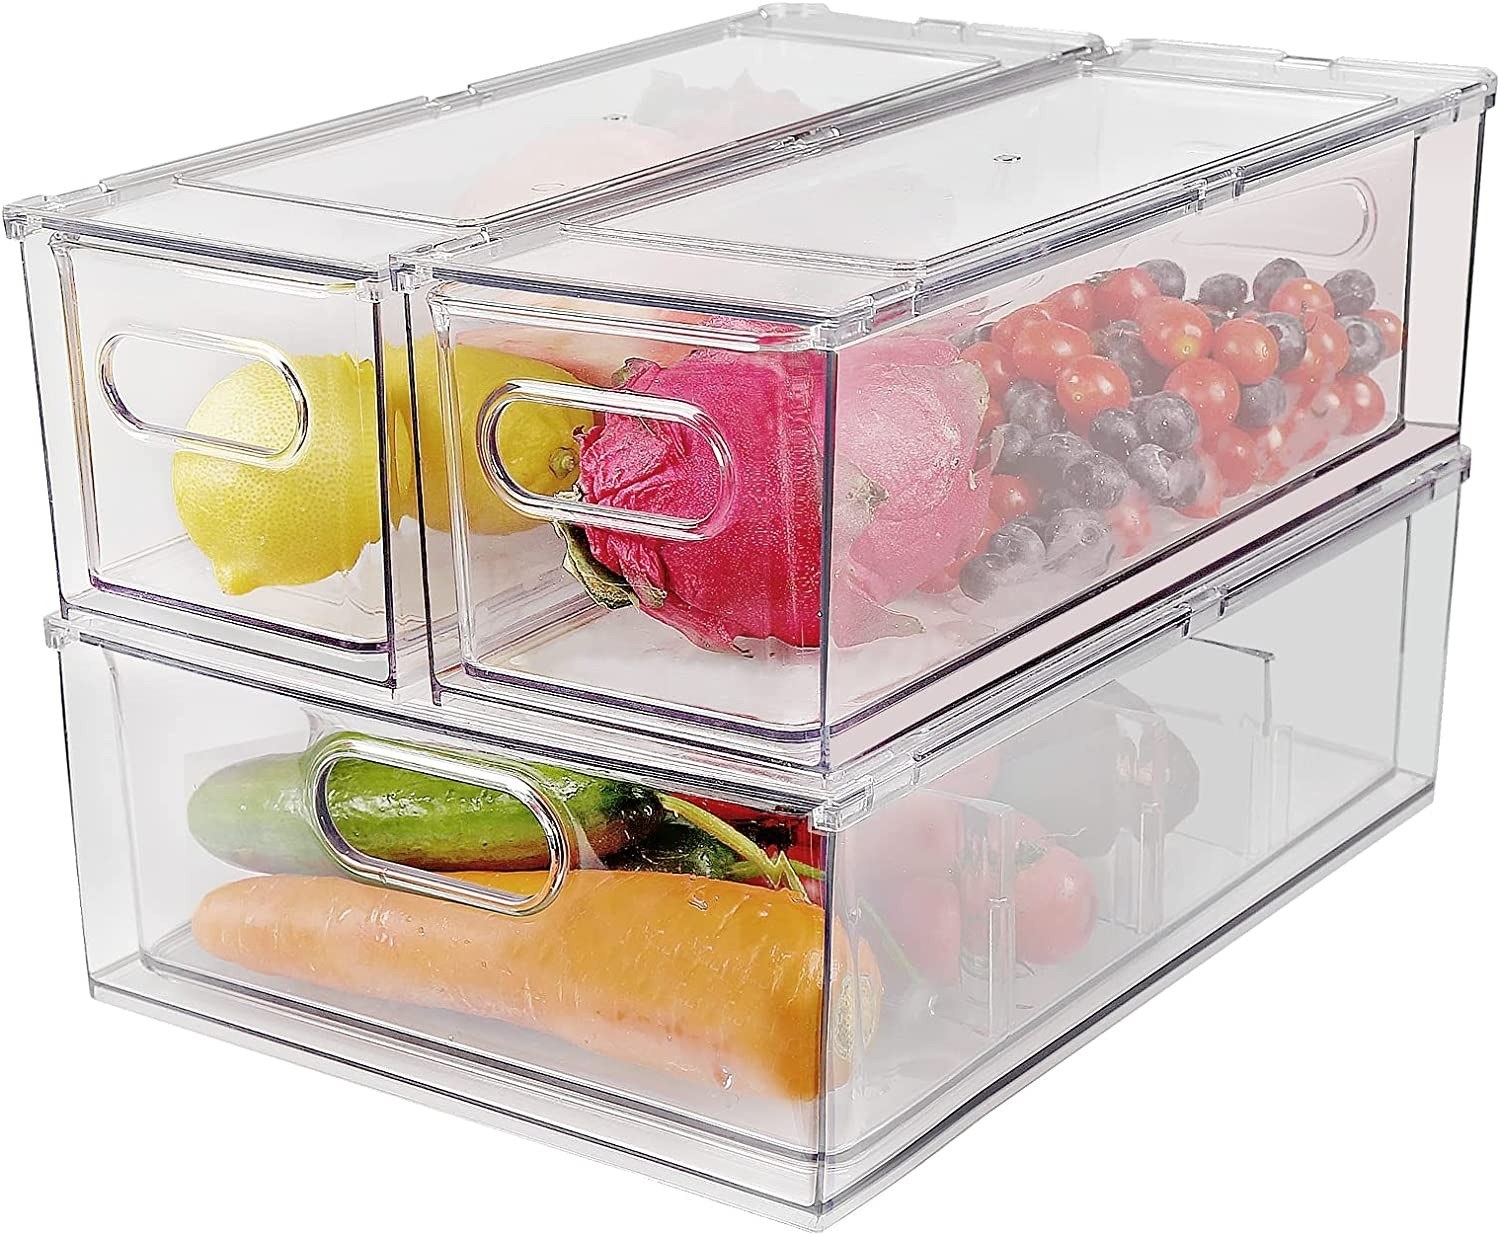 Three clear bins with fruits and vegetables